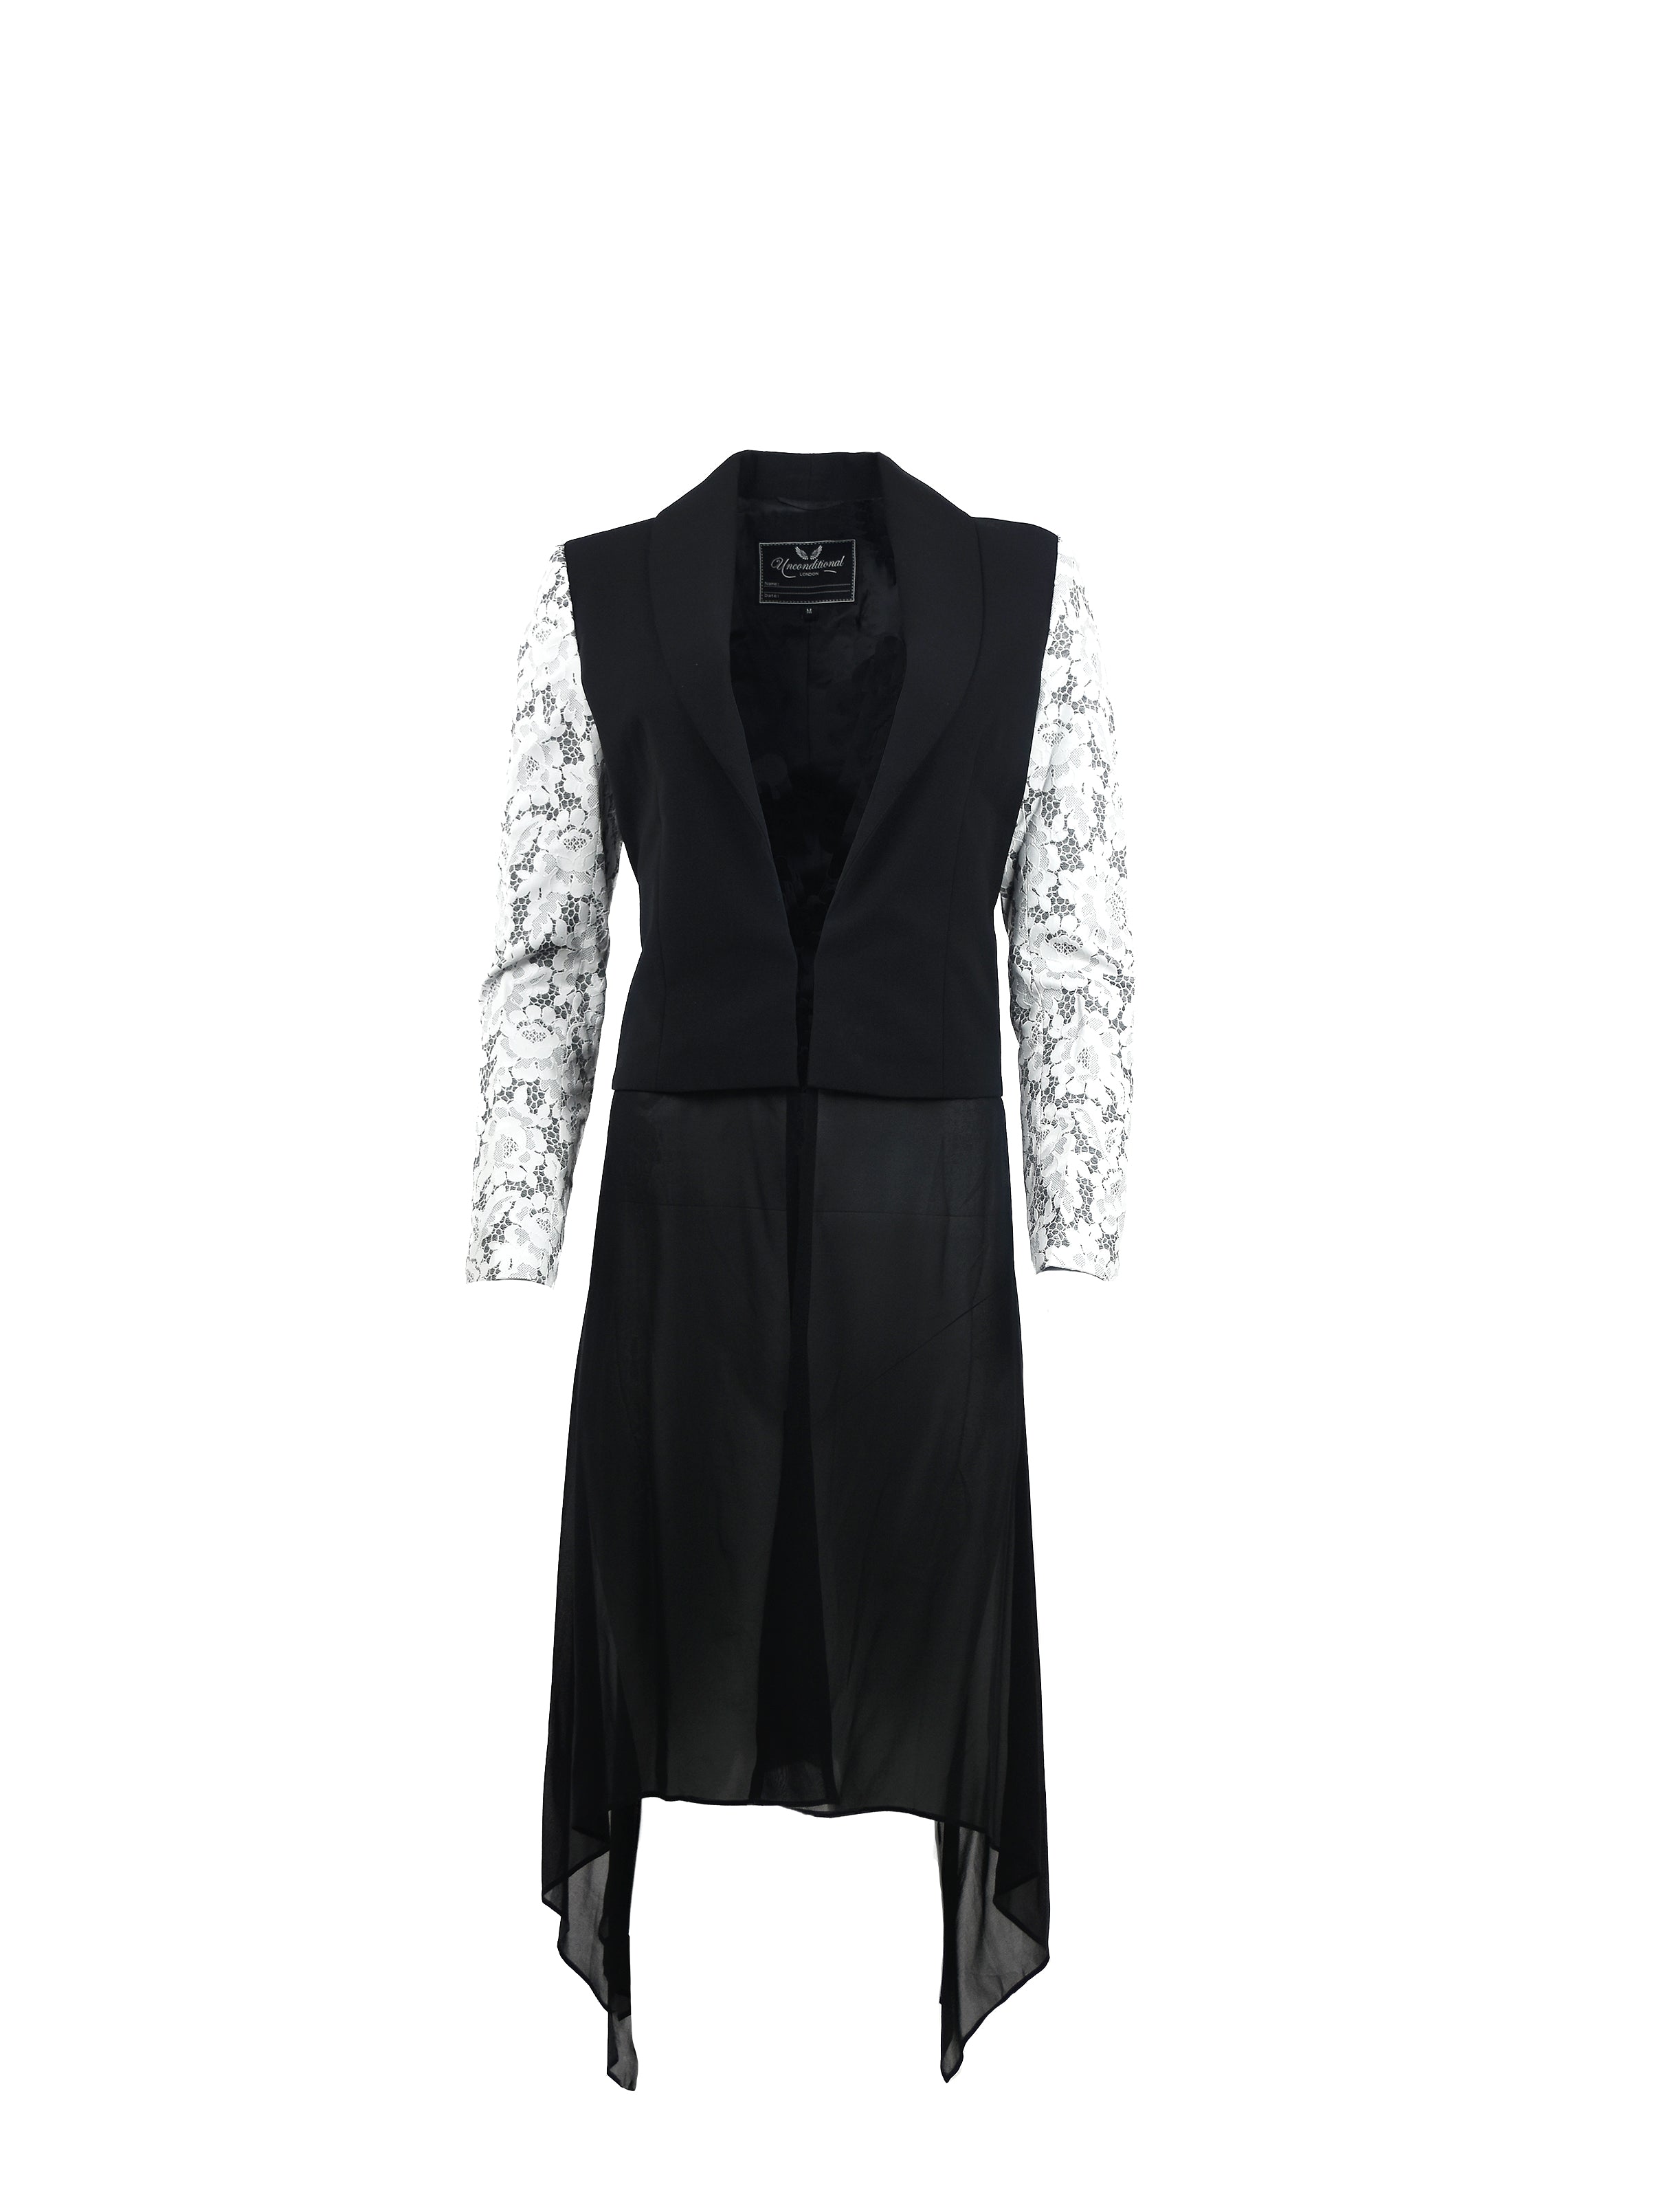 WOMENS BLACK SUIT JACKET WITH LACE SLEEVE APPLIQUE